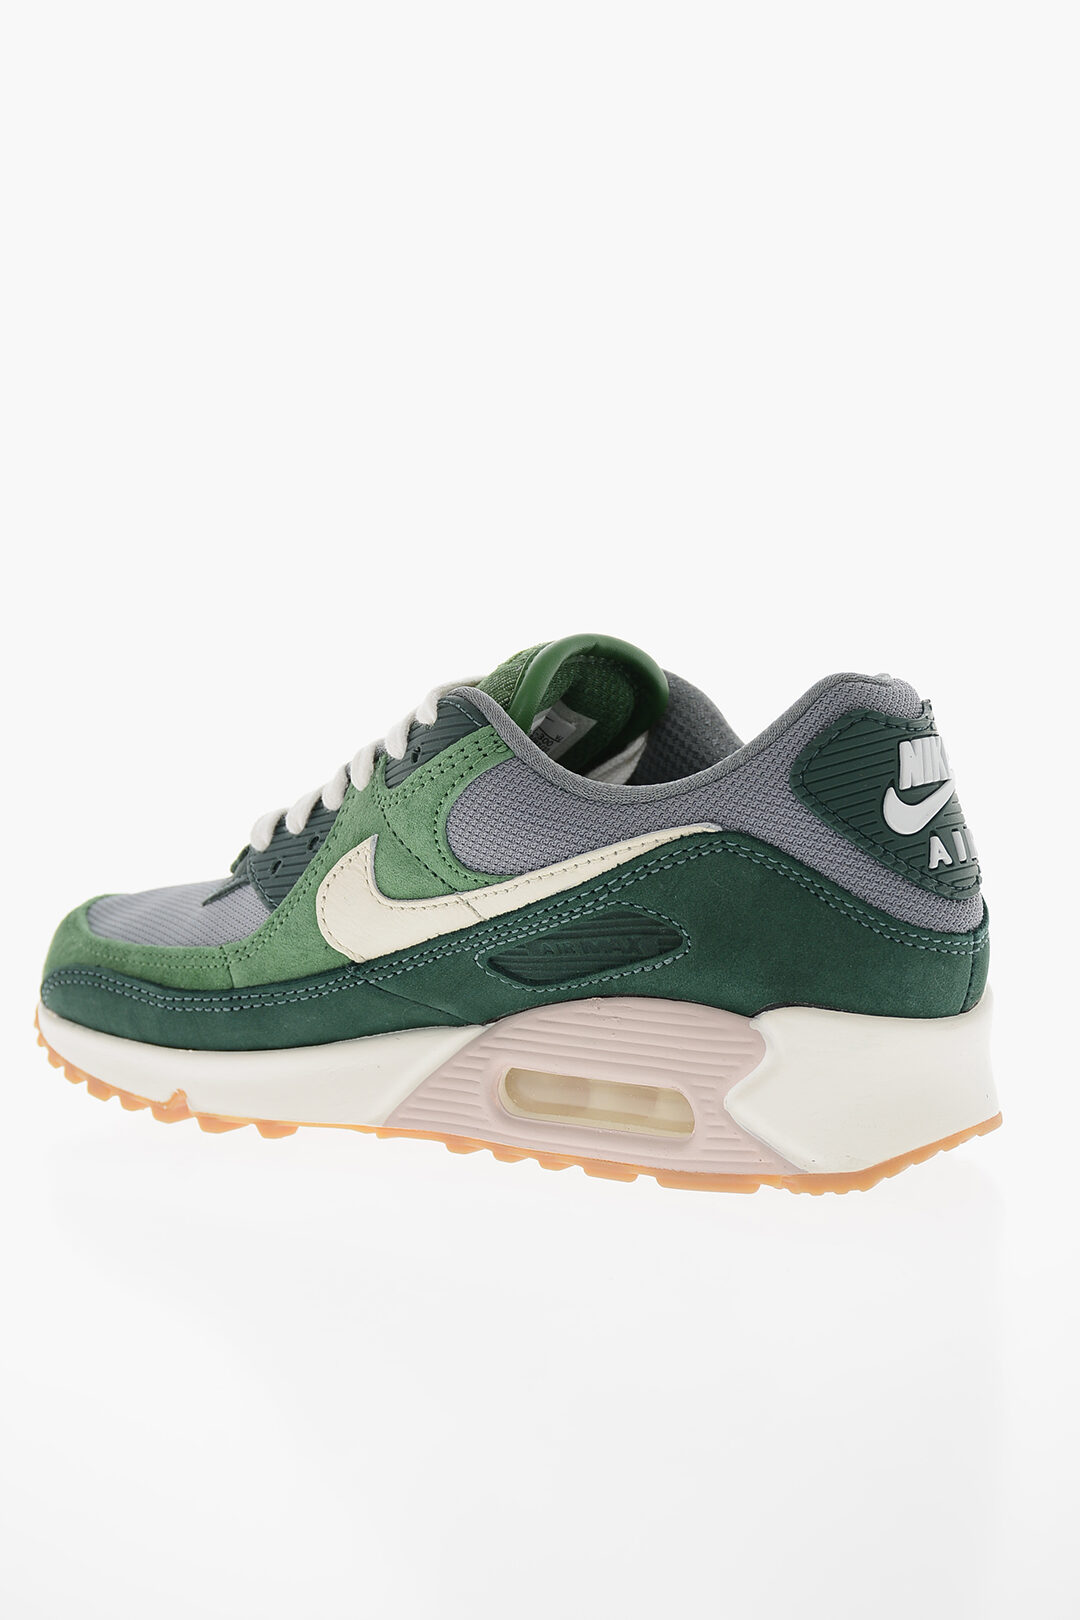 Nike Leather and Fabric AIR MAX 90 Sneakers men - Glamood Outlet